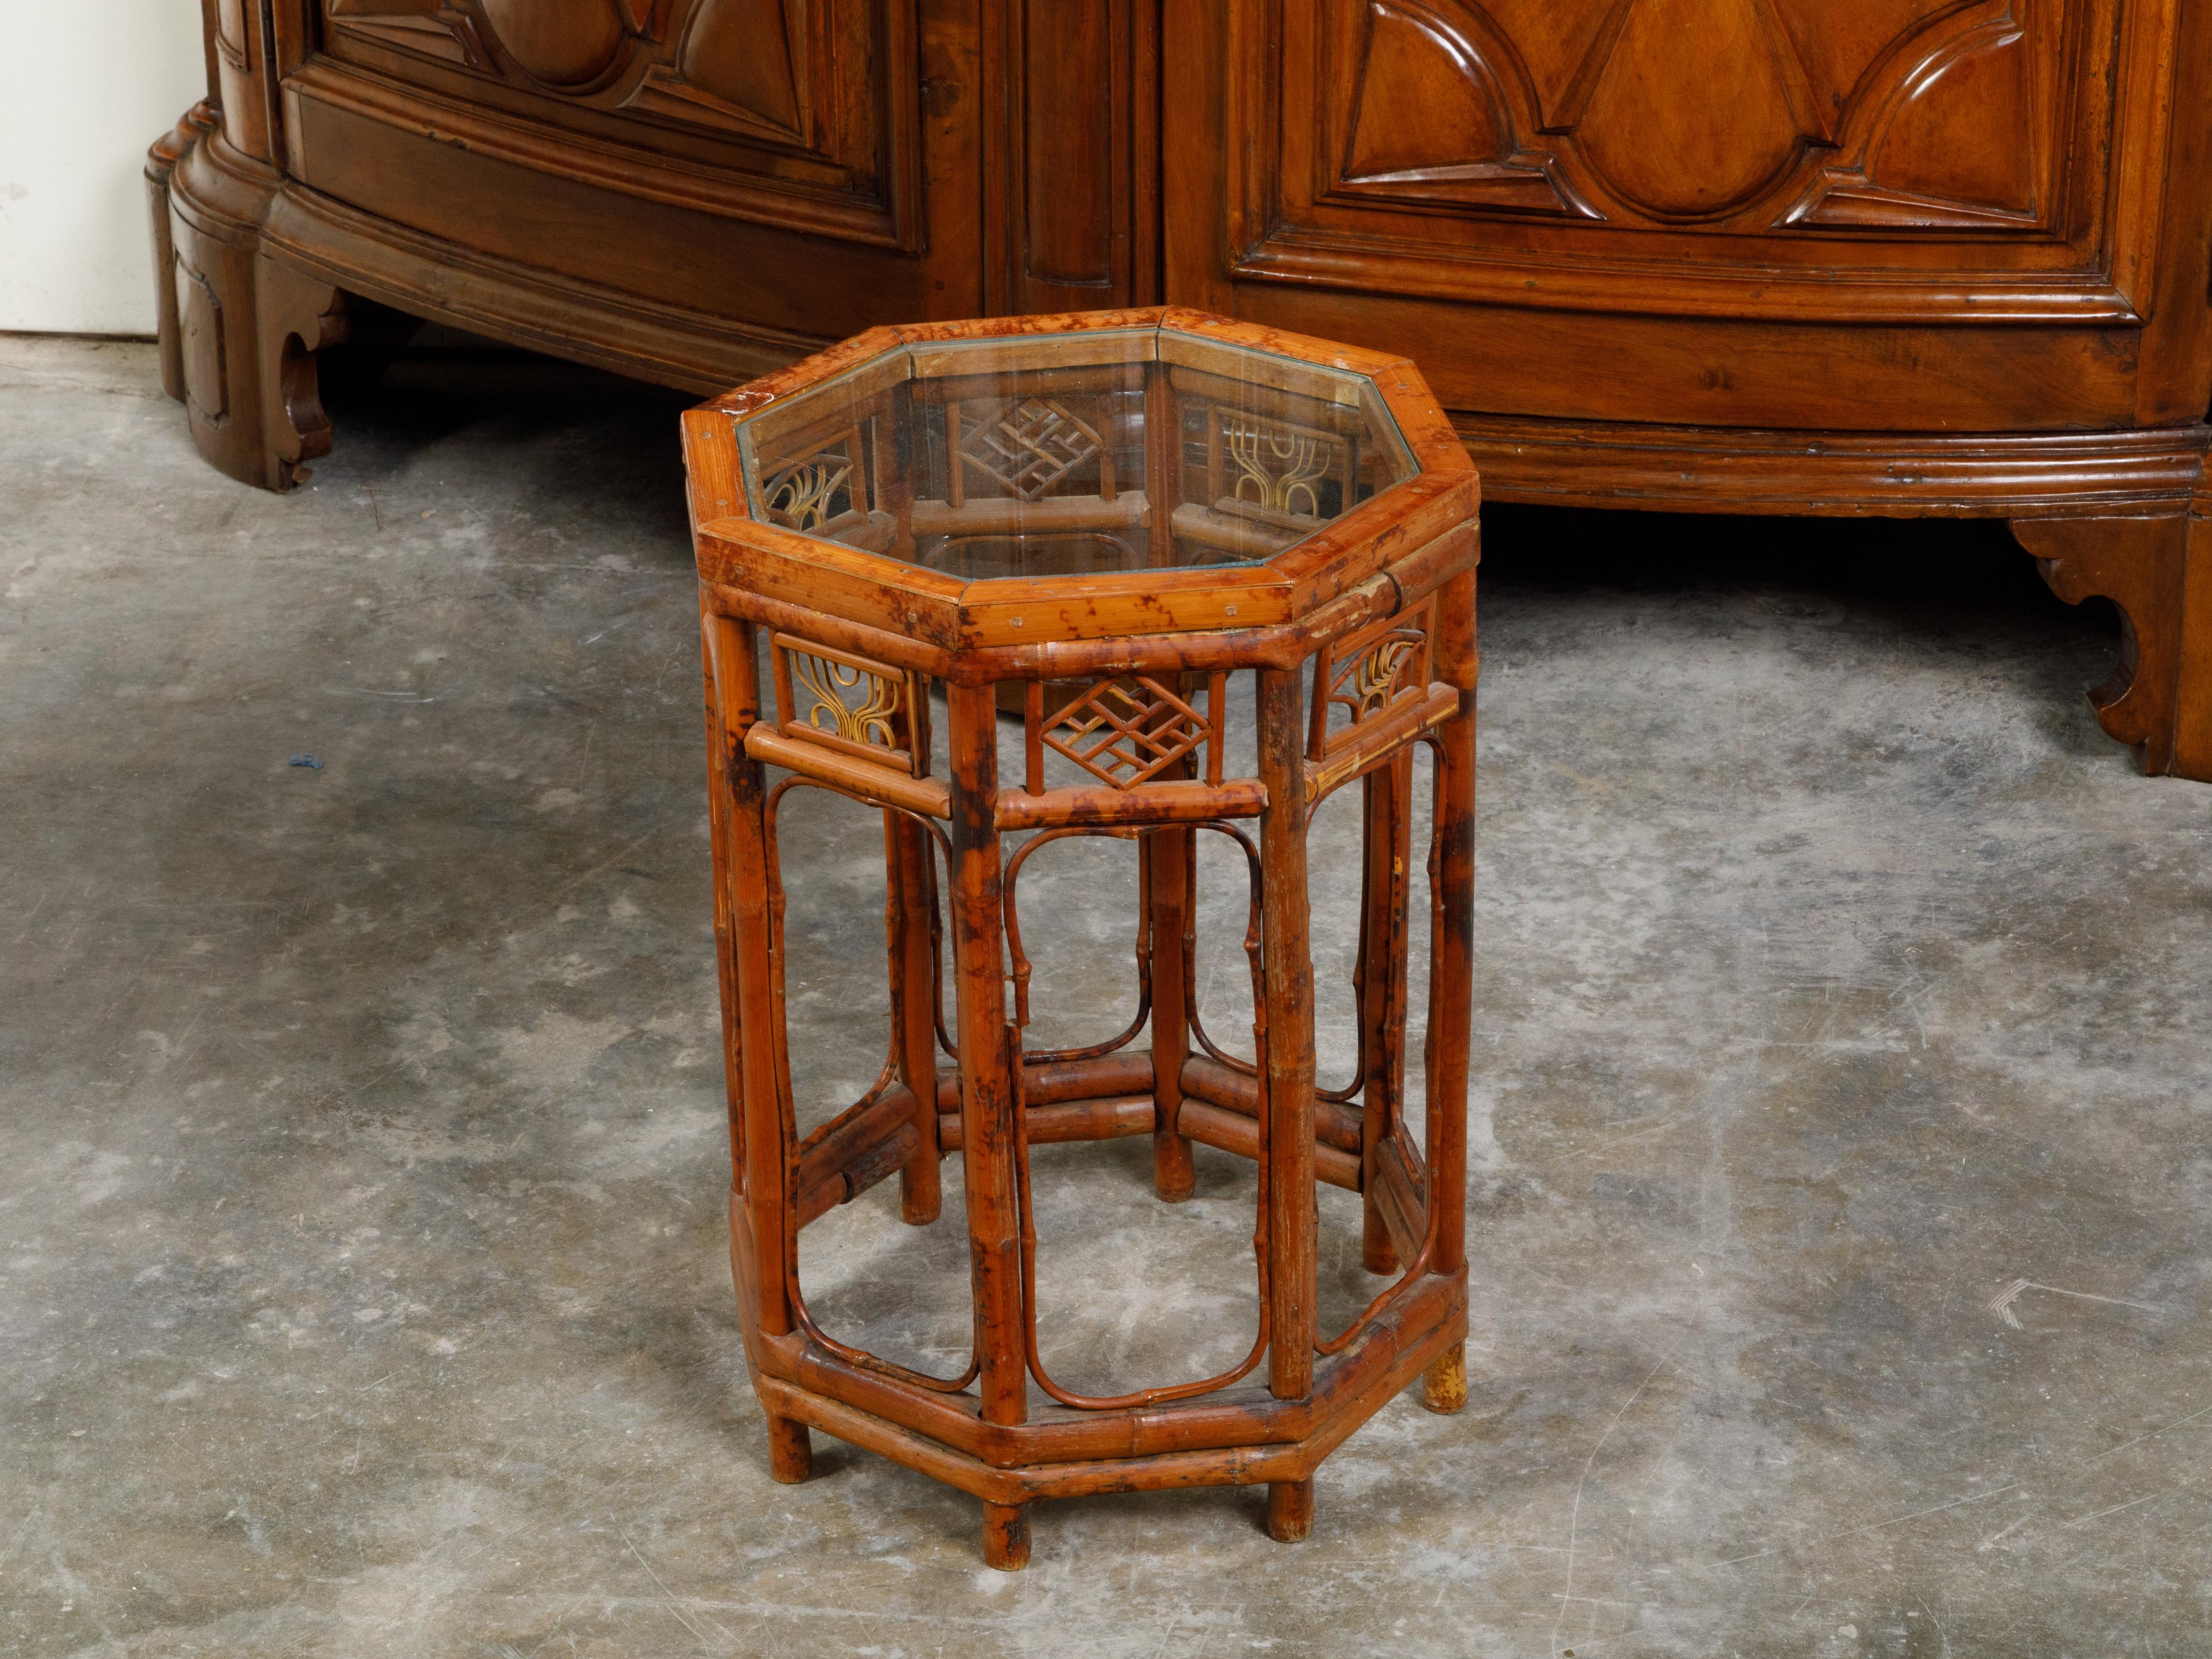 Midcentury Octagonal Bamboo Side Table with Glass Top and Geometric Motifs For Sale 5